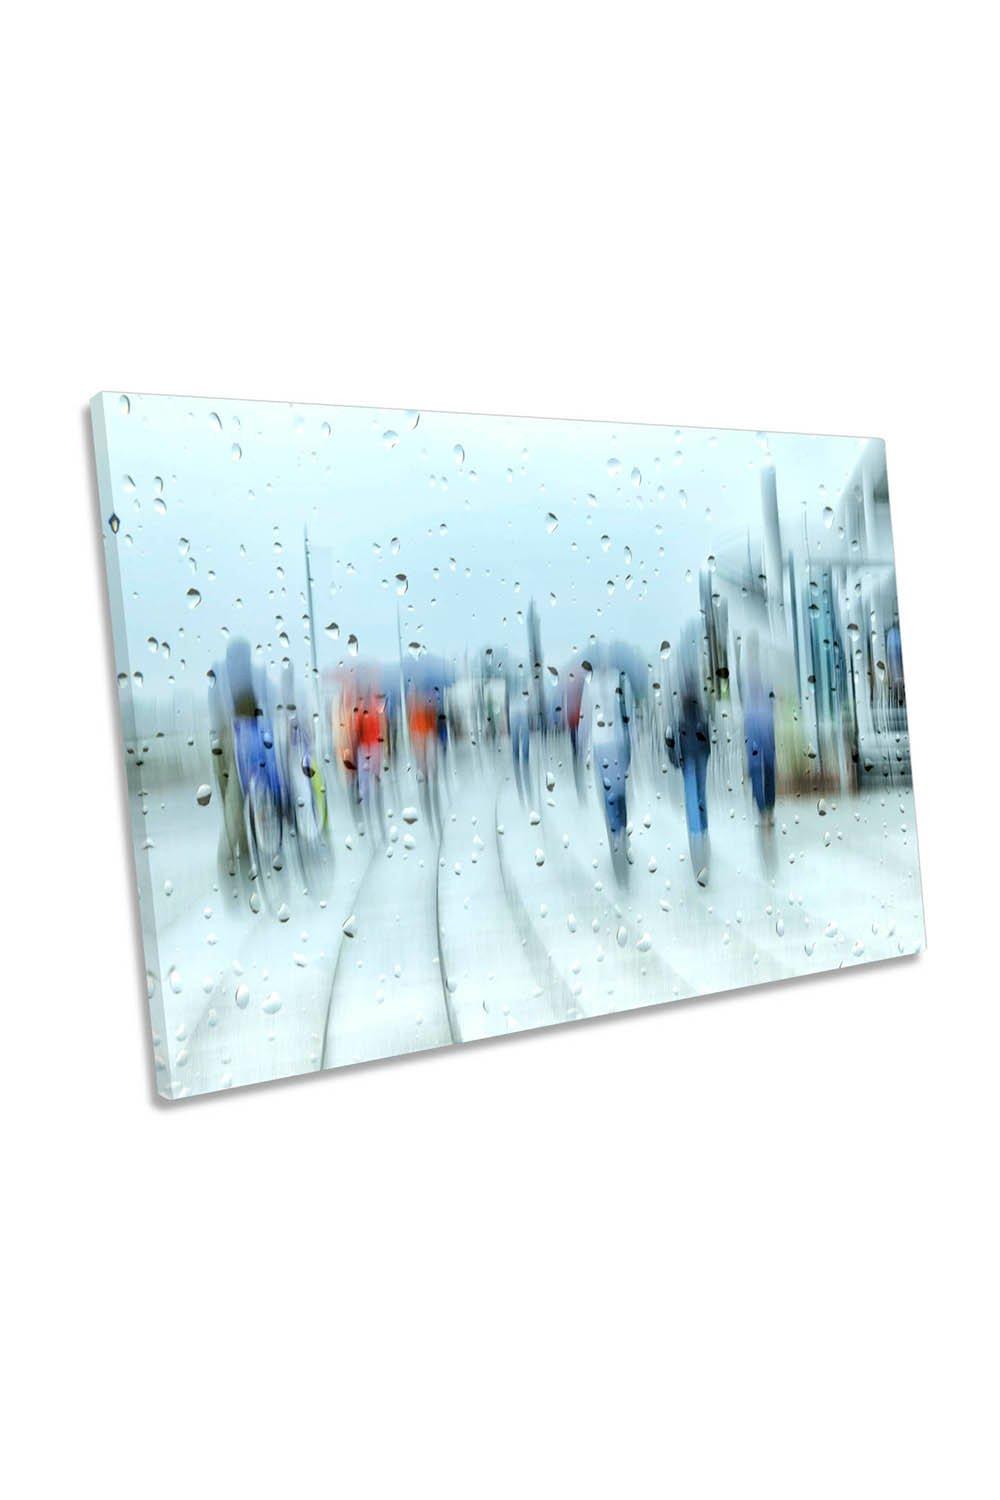 It's Raining Abstract Street Scene Canvas Wall Art Picture Print